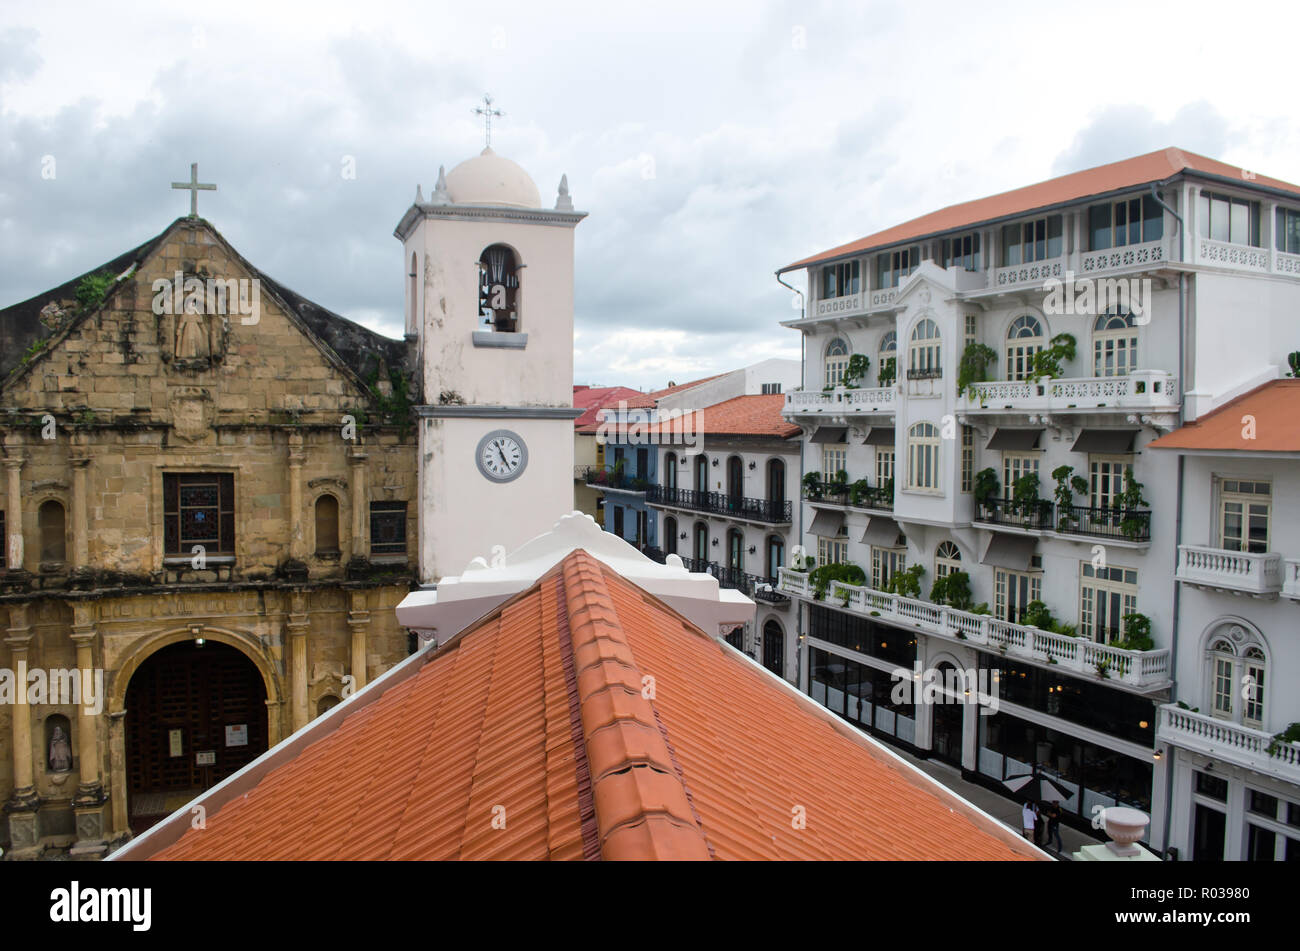 Charming Casco Viejo buildings. La Merced Church is on the left and a luxury hotel is on the right. Stock Photo